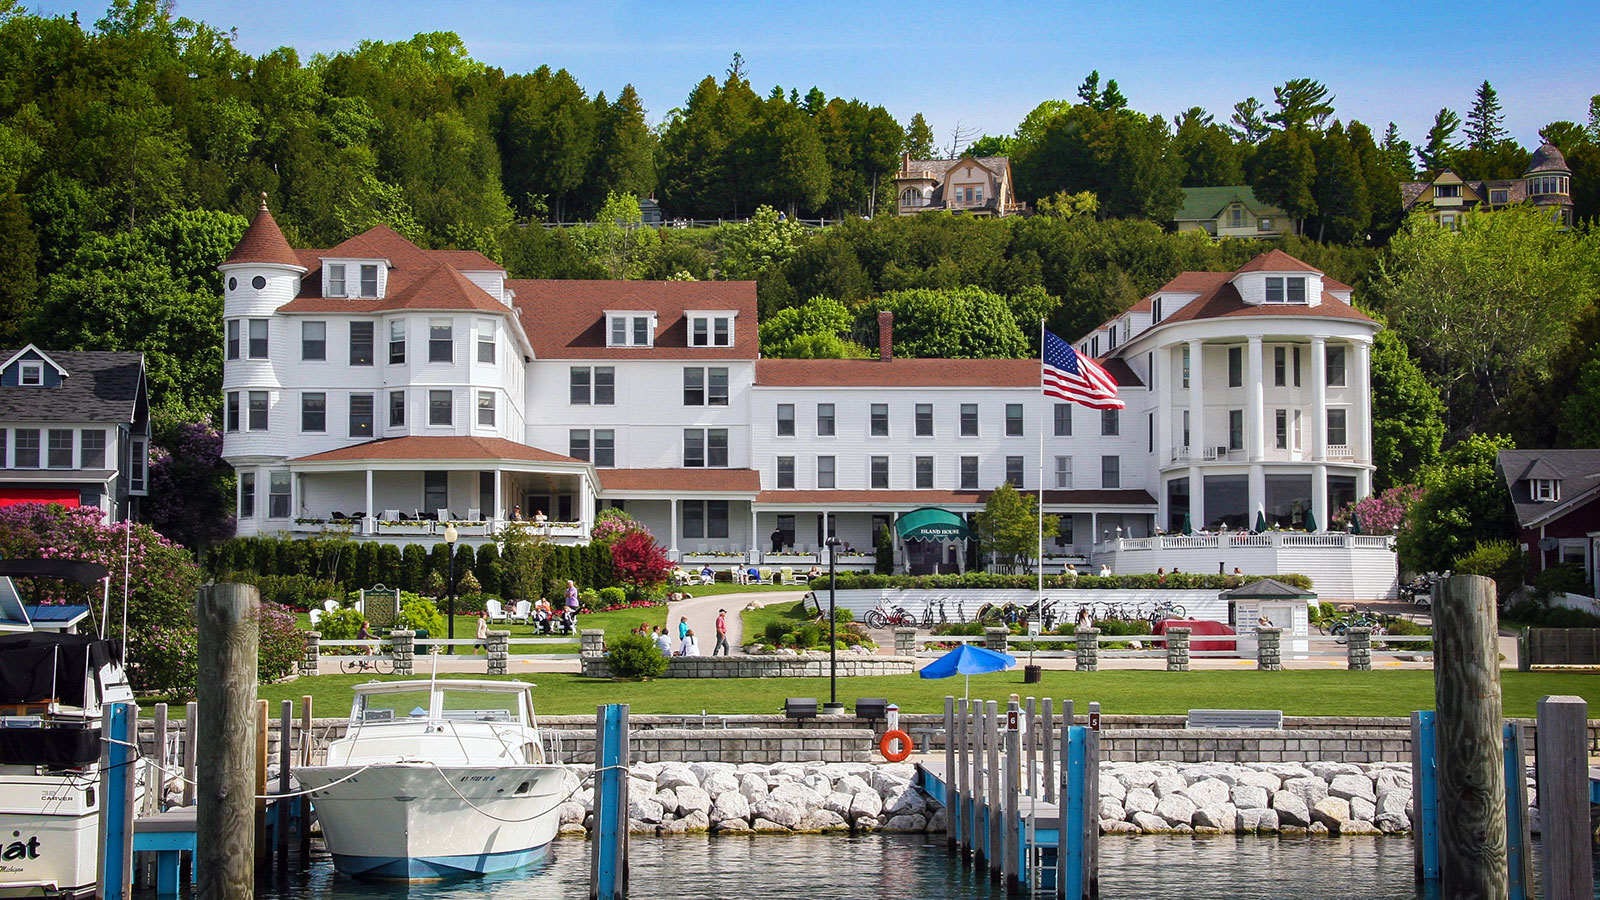 Image of Exterior and Marina, Island House Hotel in Mackinac Island, Michigan, 1852Member of Historic Hotels of America, Special Offers, Discounted Rates, Families, Romantic Escape, Honeymoons, Anniversaries, Reunions